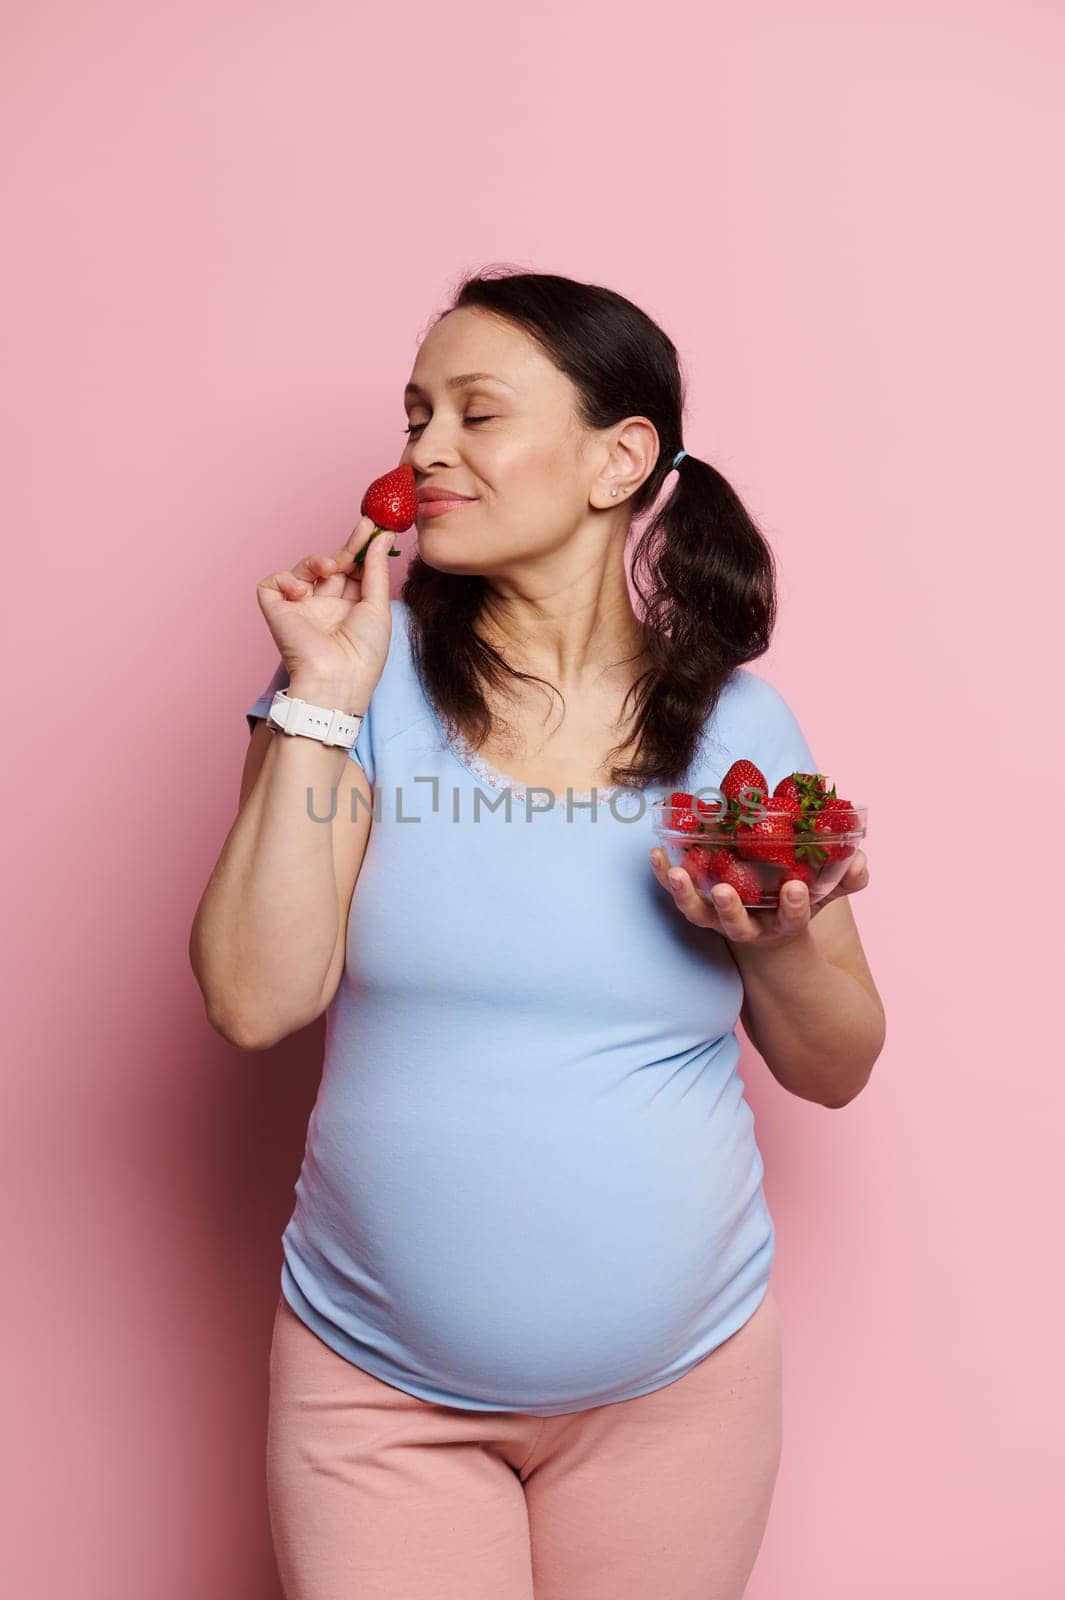 Beautiful glamorous pregnant woman in a blue t-shirt and pink pants, sniffing fresh ripe strawberries, enjoying a healthy diet during pregnancy, posing with bowl of berries on isolated pink background